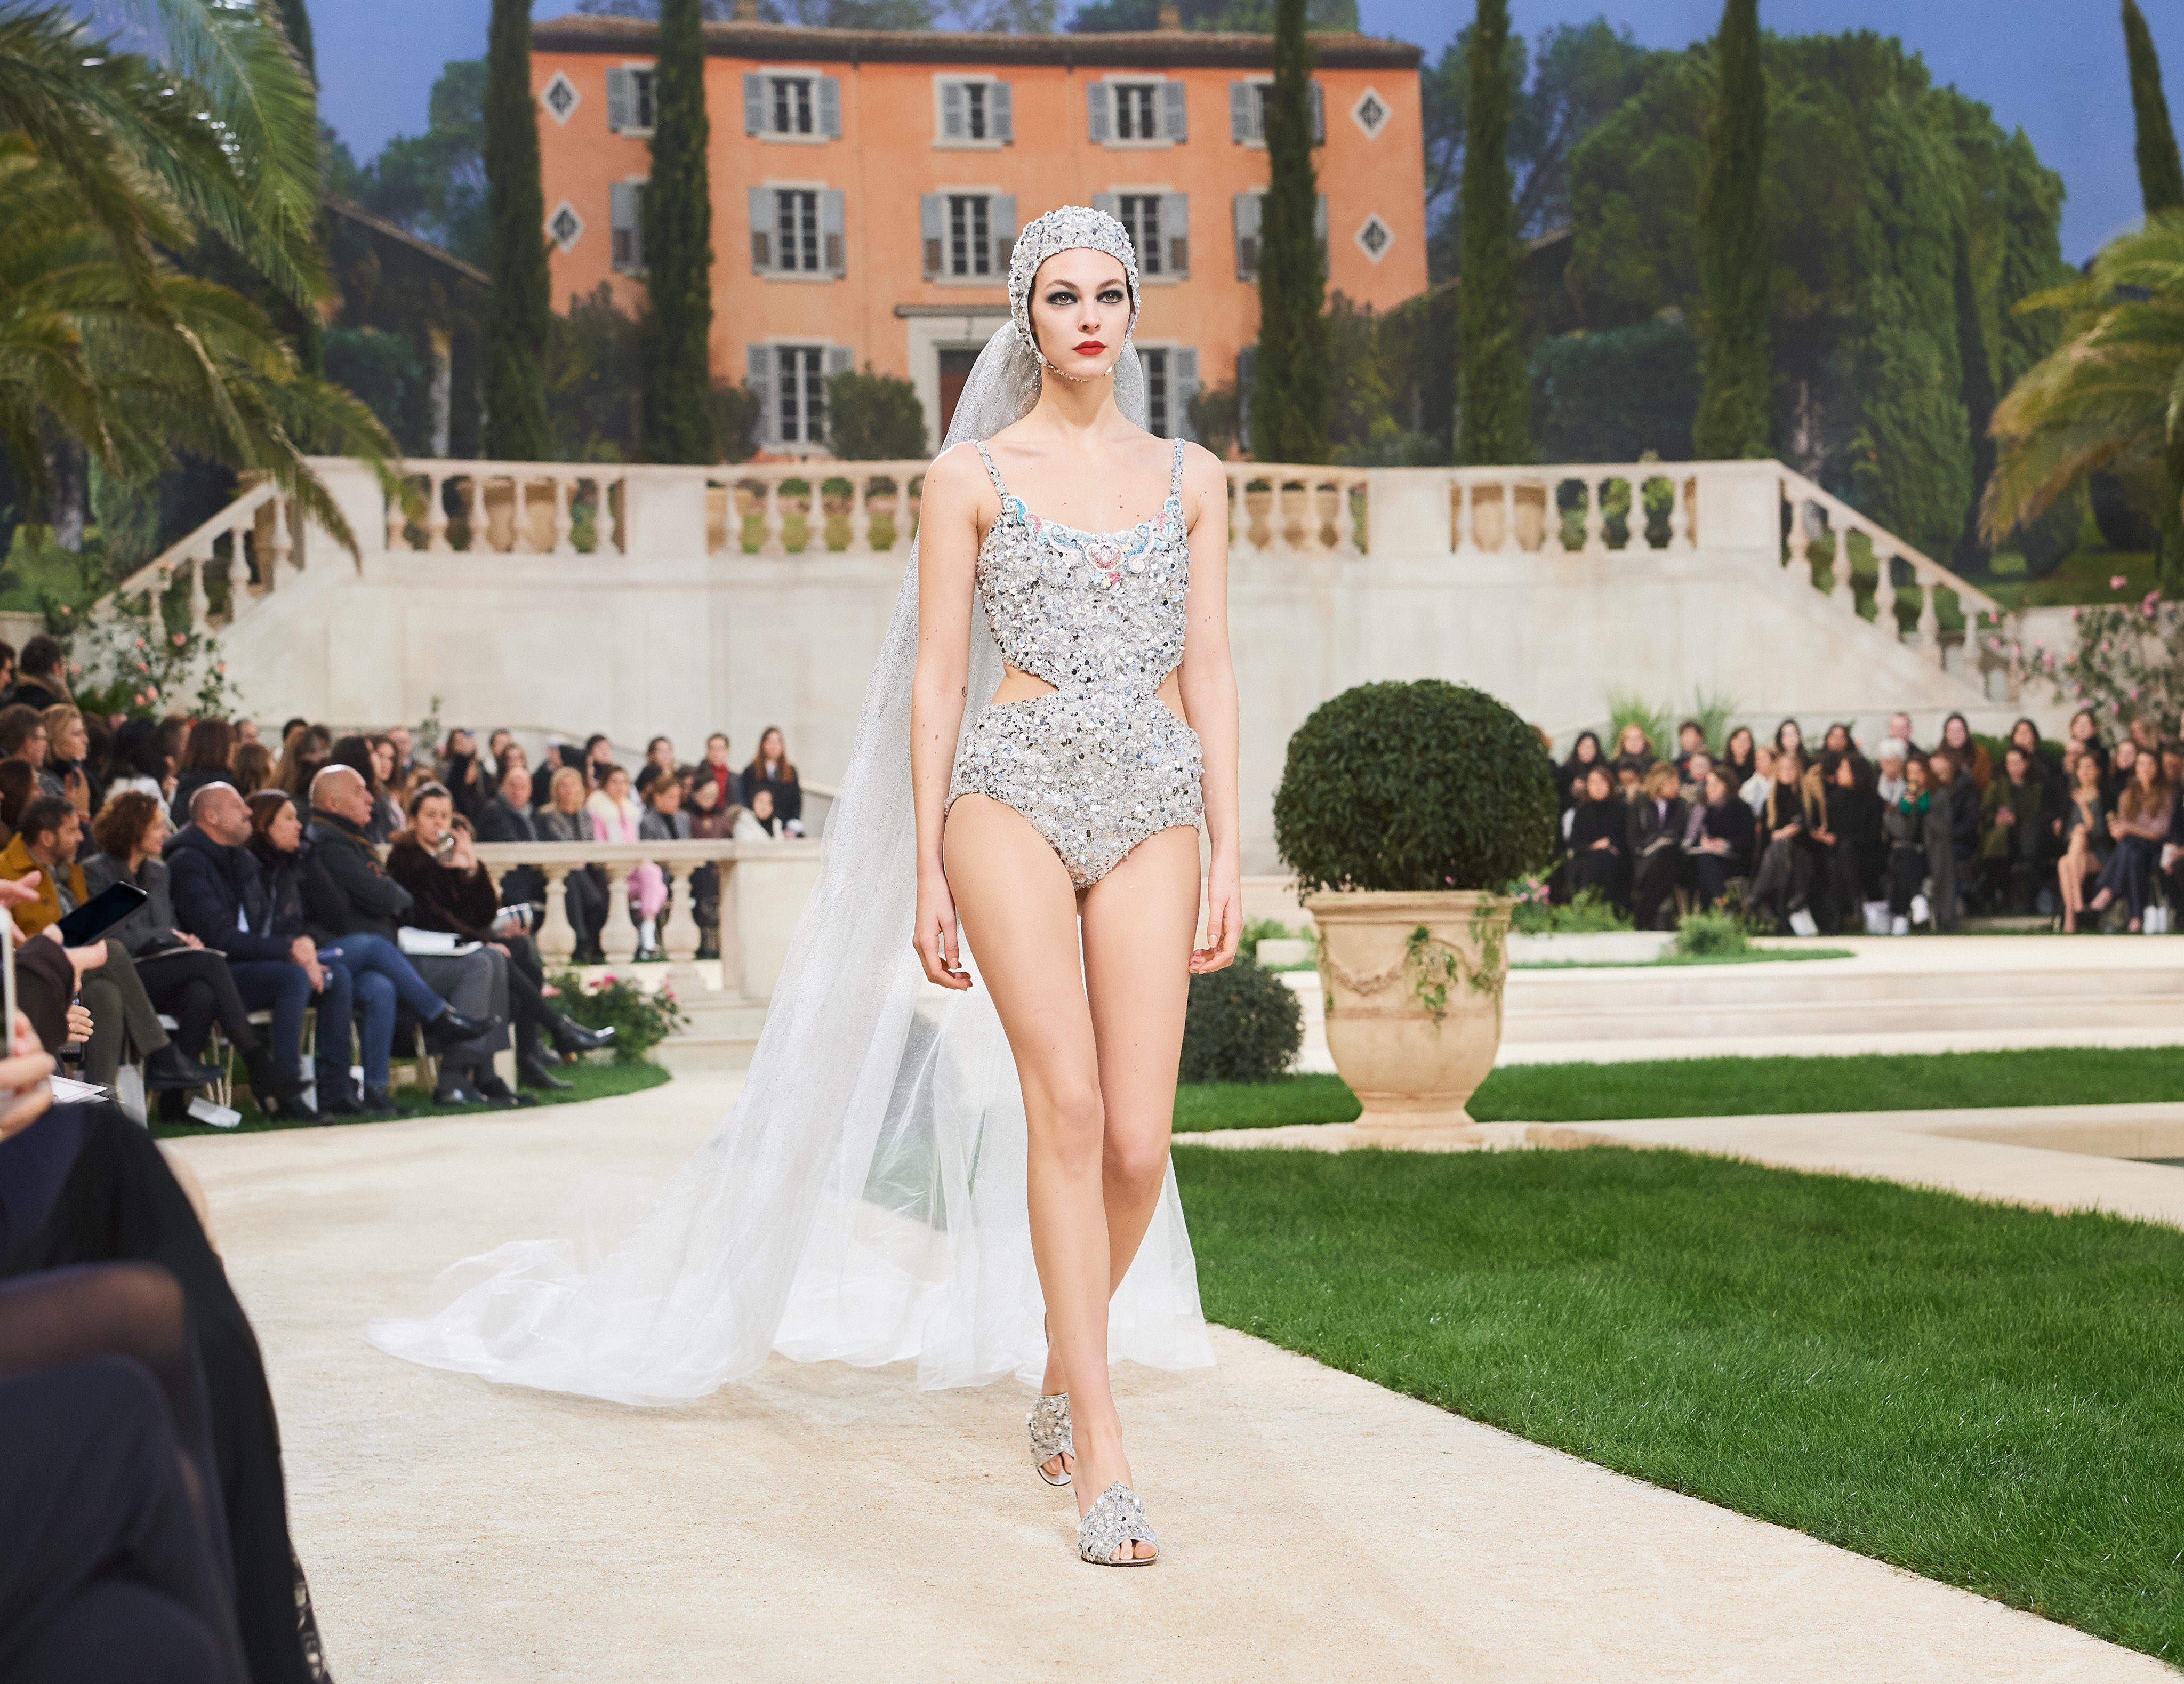 Opt for a simple and beautiful dress or be rebellious and try something different on your big day – like Karl Lagerfeld’s swimsuit-style wedding gown that closed Chanel’s spring 2019 show.